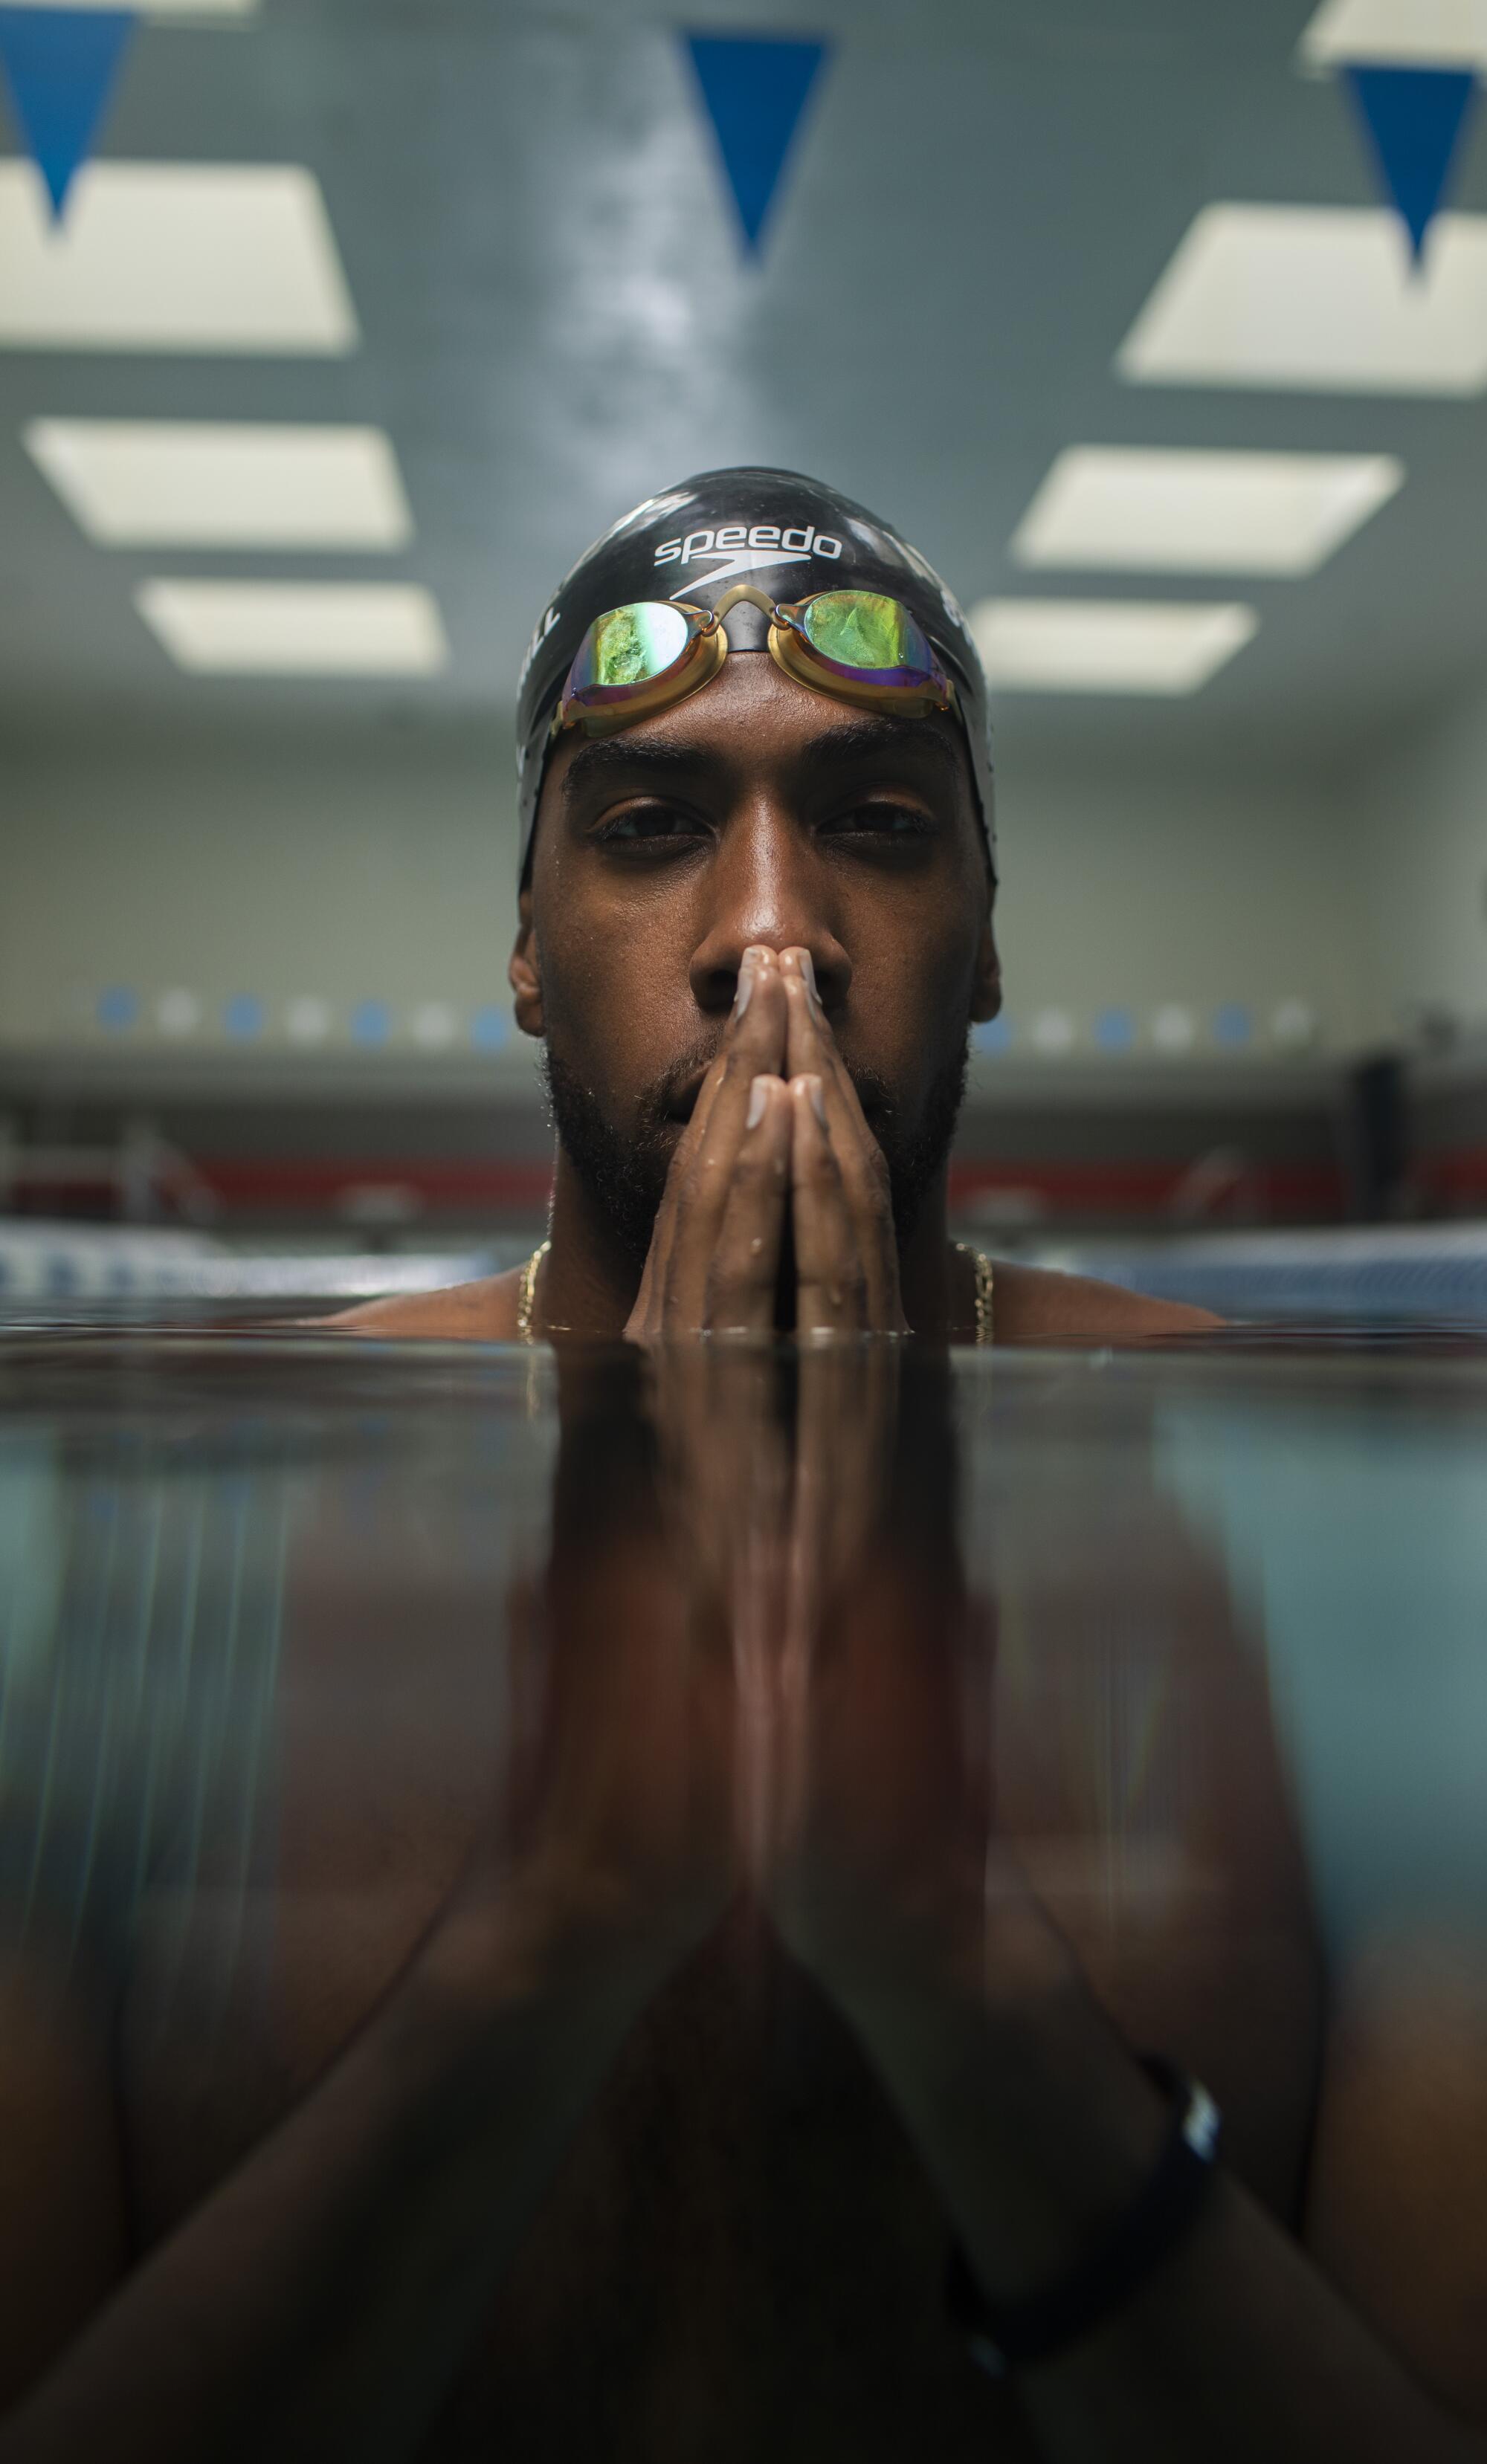 Jamal Hill is neck deep in a pool, with his hands held together in front of his mouth